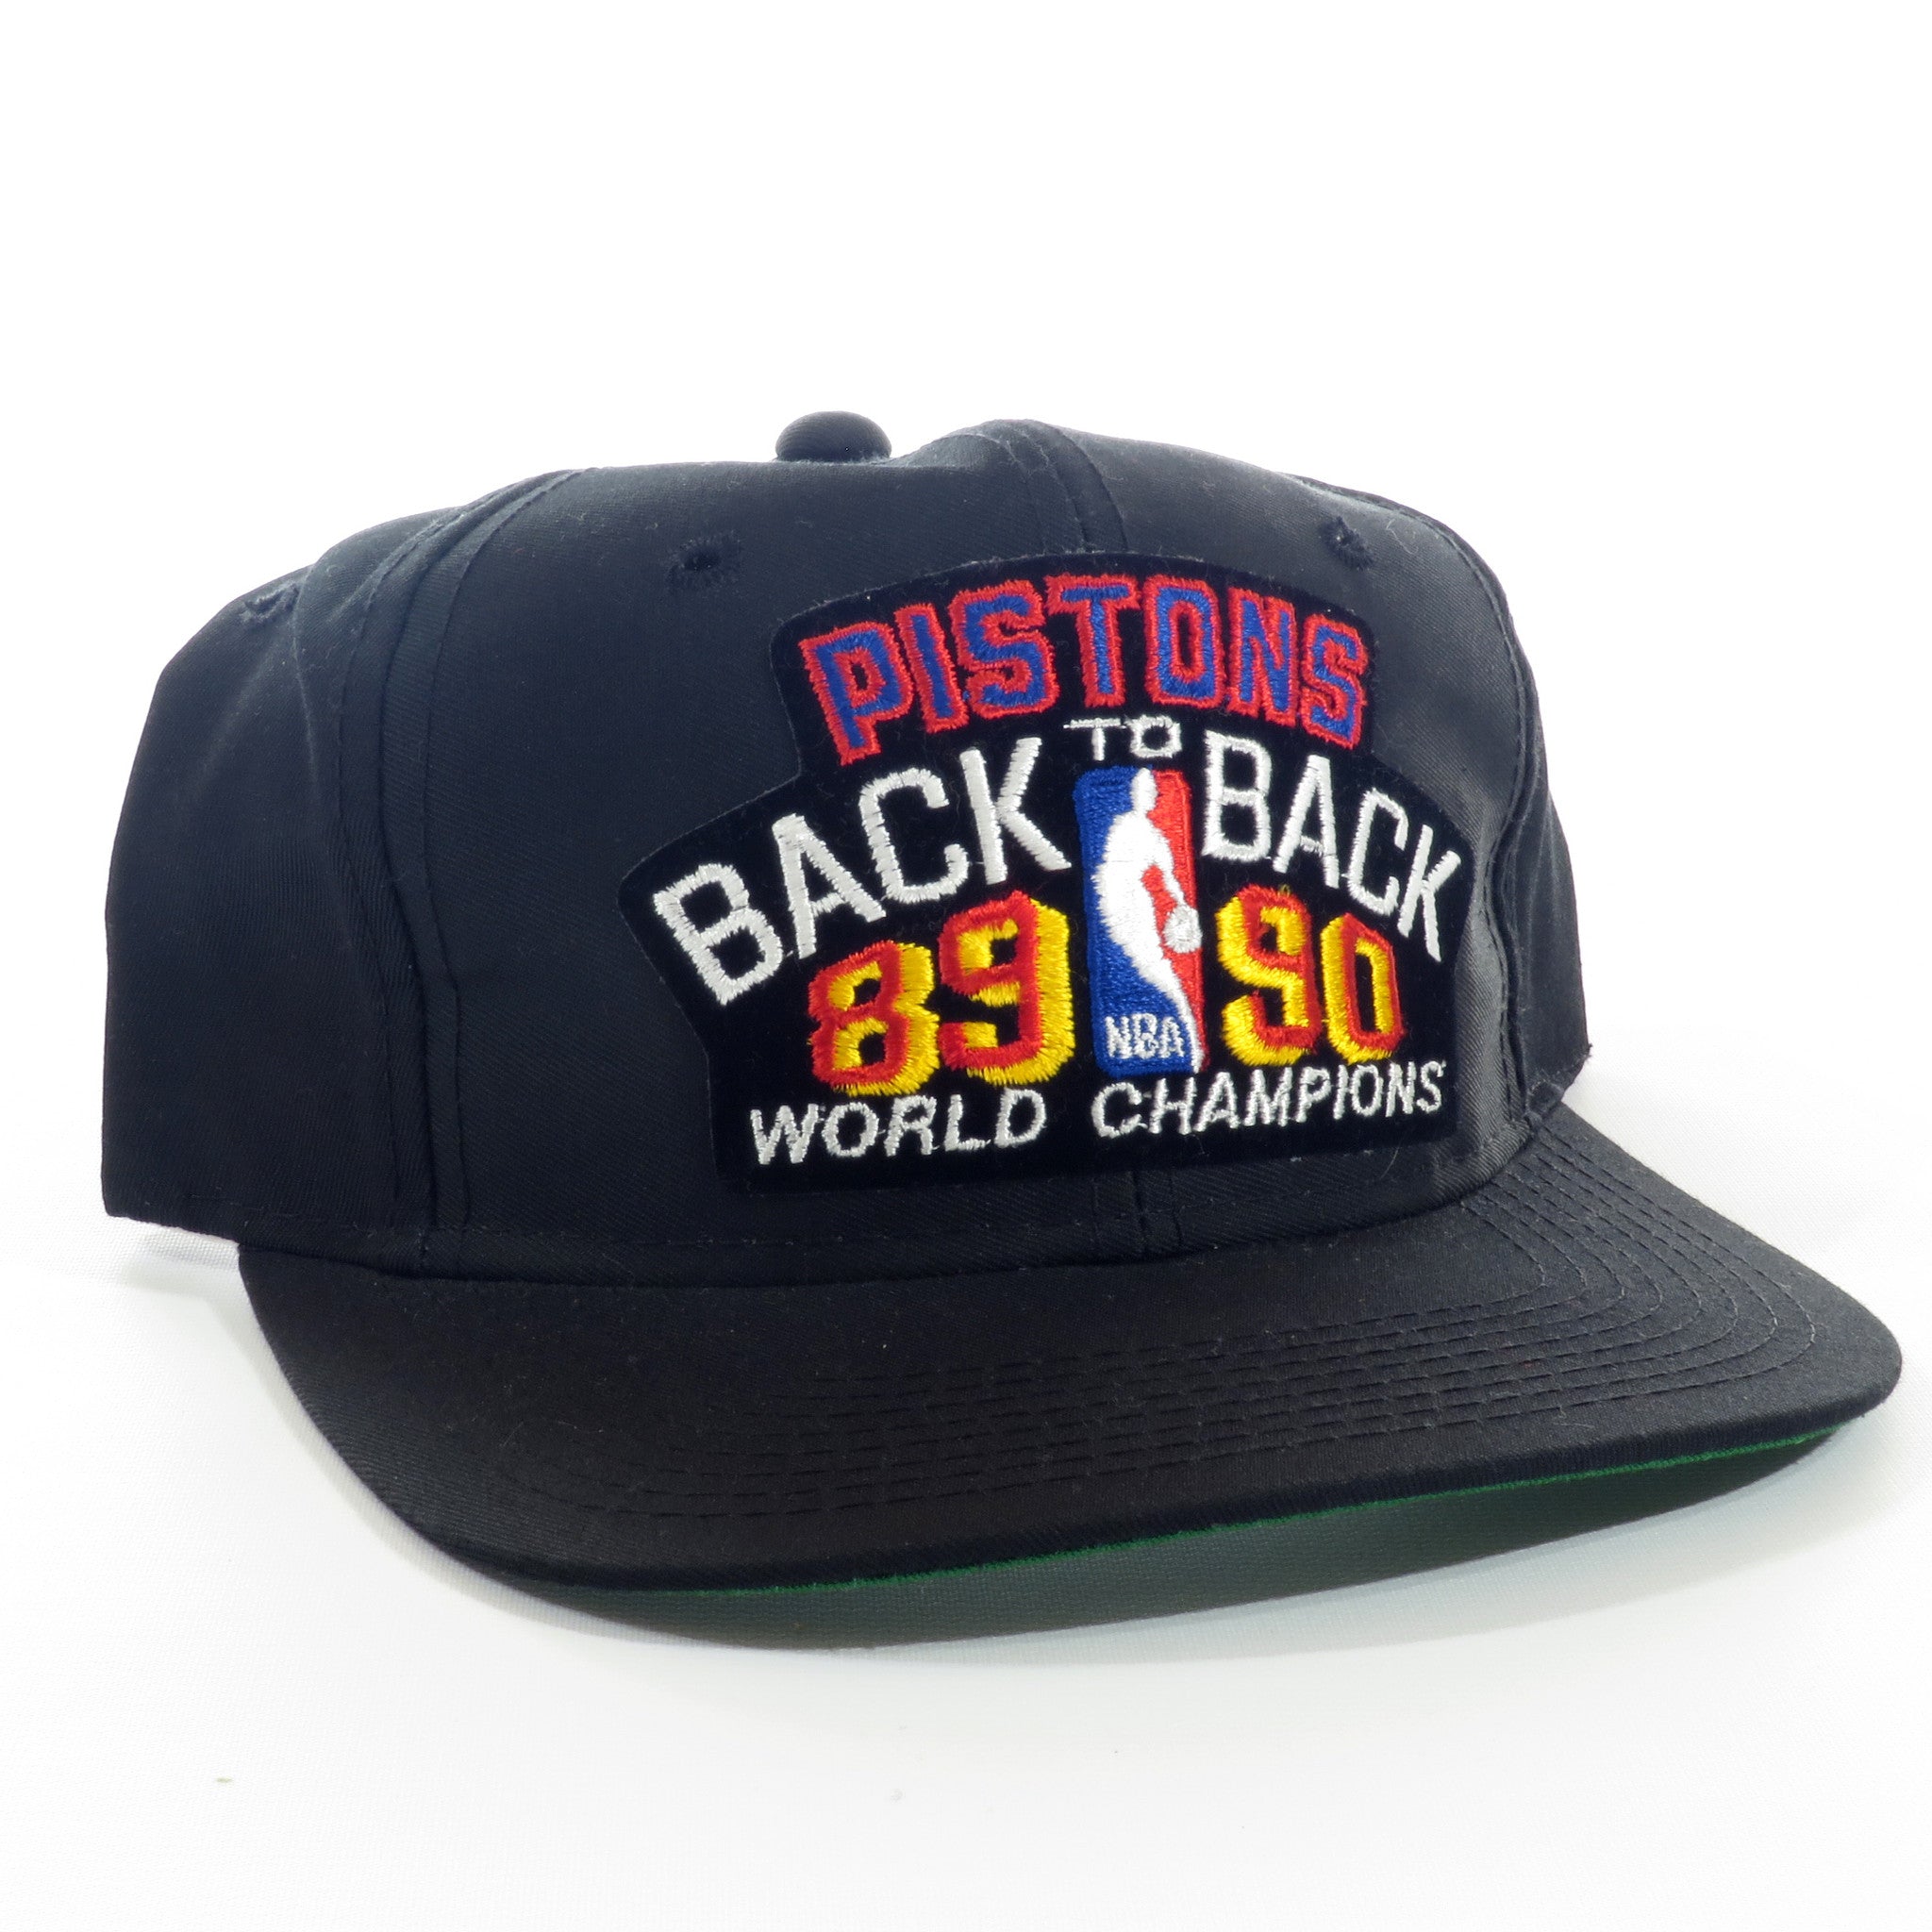 Detroit Pistons Sports Specialties 89-90 Back to Back Champions